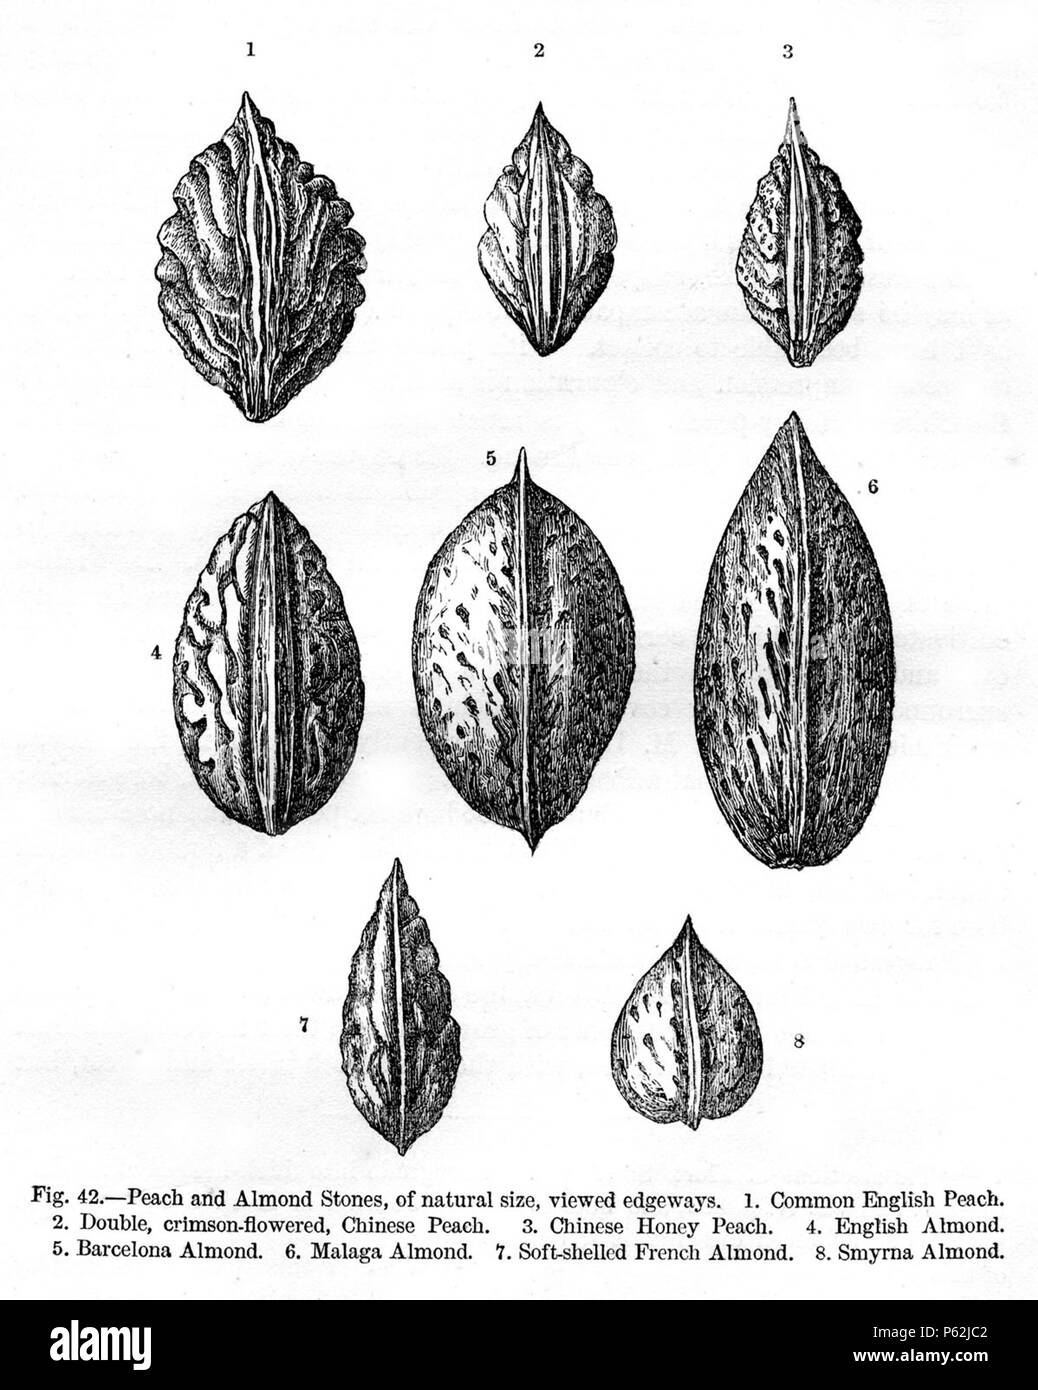 N/A. English: Figure 42 - 'Peach and almond stones, of natural size, viewed edgeways' from Charles Darwin's book Variation of Animals and Plants Under Domestication published in 1868. January 1868.   Charles Darwin  (1809–1882)       Alternative names Charles Robert Darwin  Description British naturalist and author  Date of birth/death 12 February 1809 19 April 1882  Location of birth/death The Mount, Shrewsbury Down House  Authority control  : Q1035 VIAF:27063124 ISNI:0000 0001 2125 1077 ULAN:500228559 LCCN:n78095637 NARA:10580367 WorldCat 413 Darwin Variation Fig42 Stock Photo